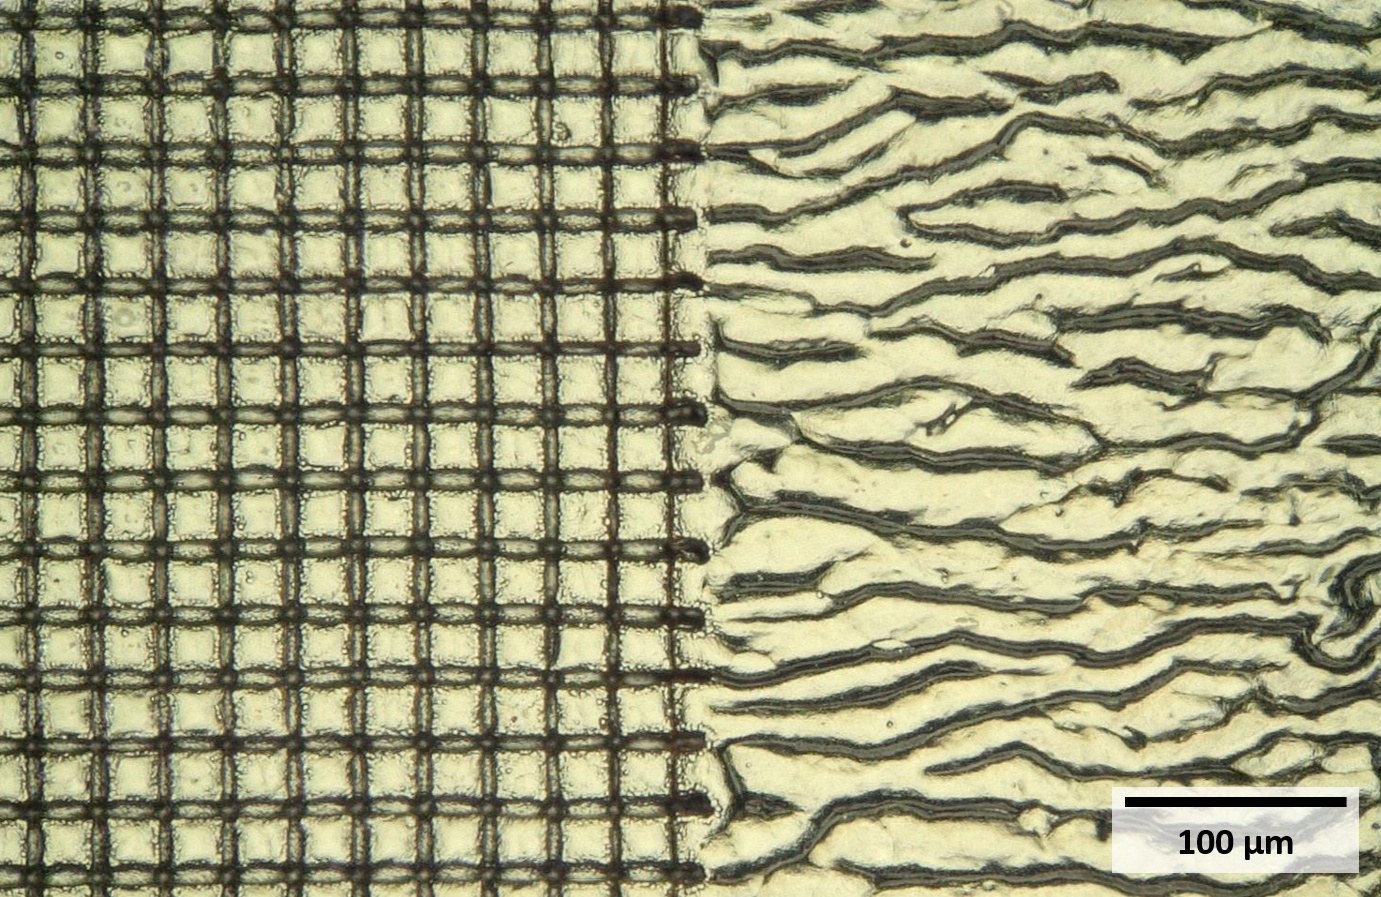 Comparison of coated and structured (left) and unstructured (right) elastomer substrate.